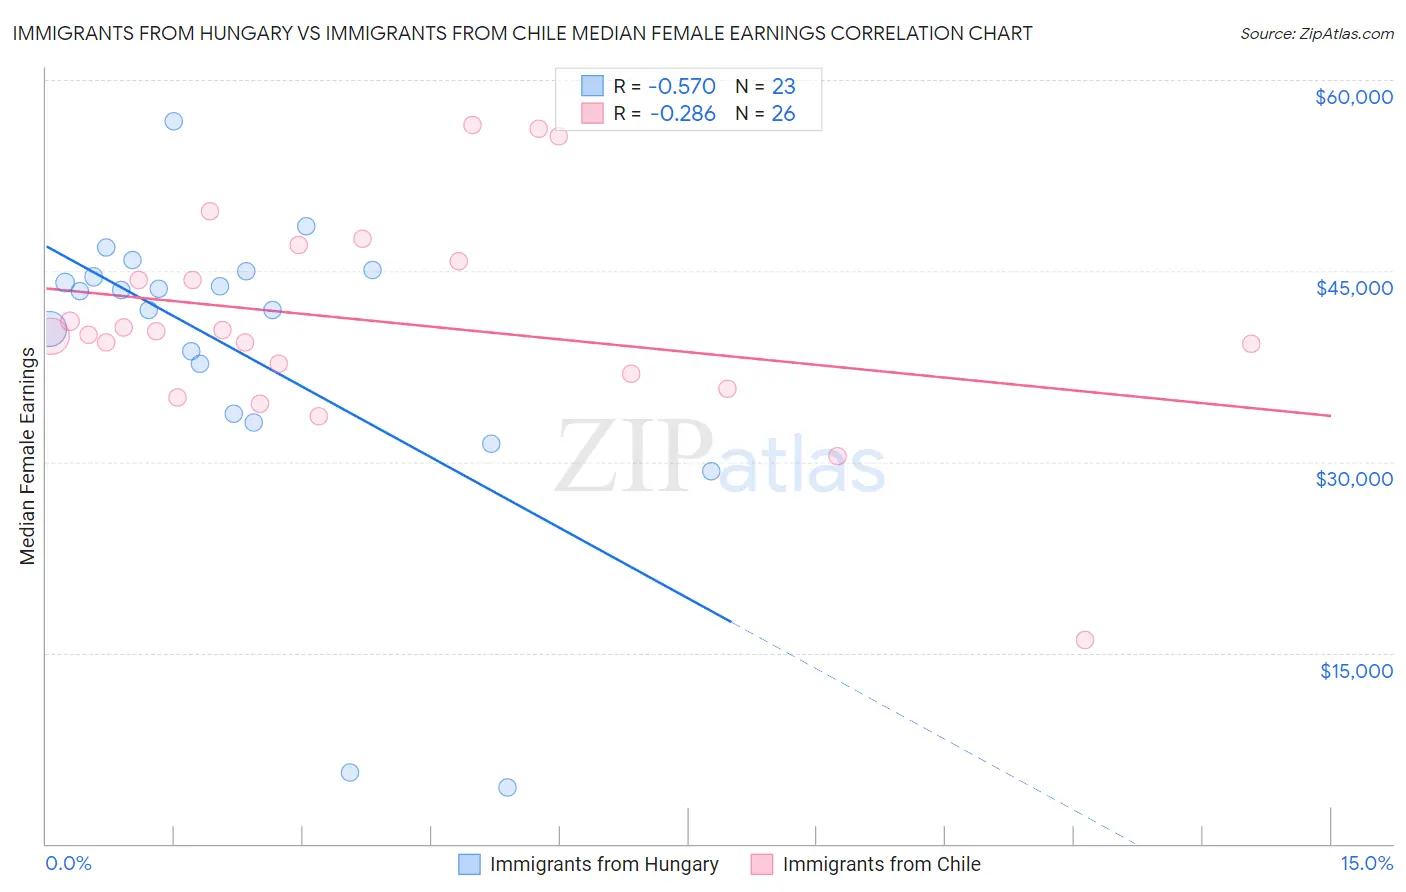 Immigrants from Hungary vs Immigrants from Chile Median Female Earnings